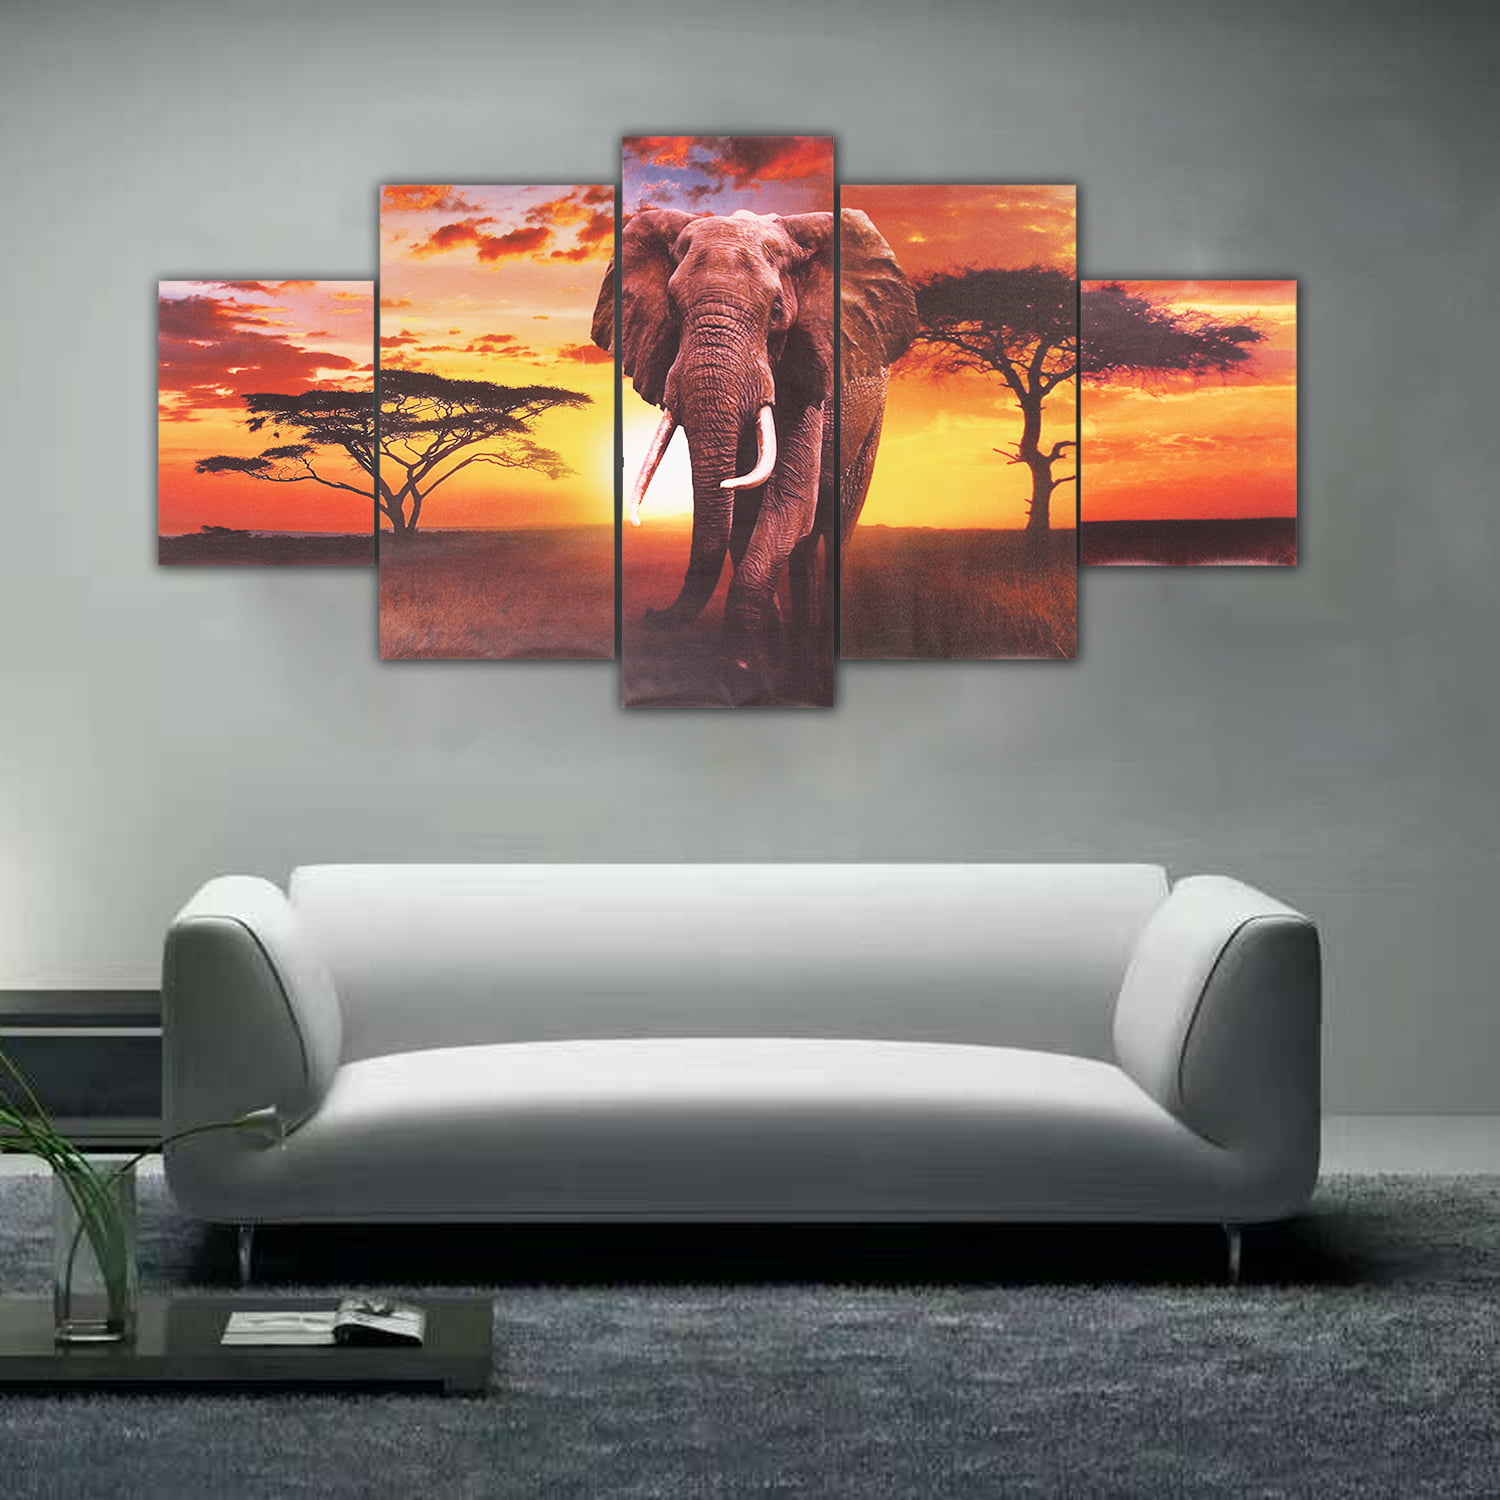 5 Panel Sunset Elephant Canvas Painting Print Picture Modern Home Decor Unframed 